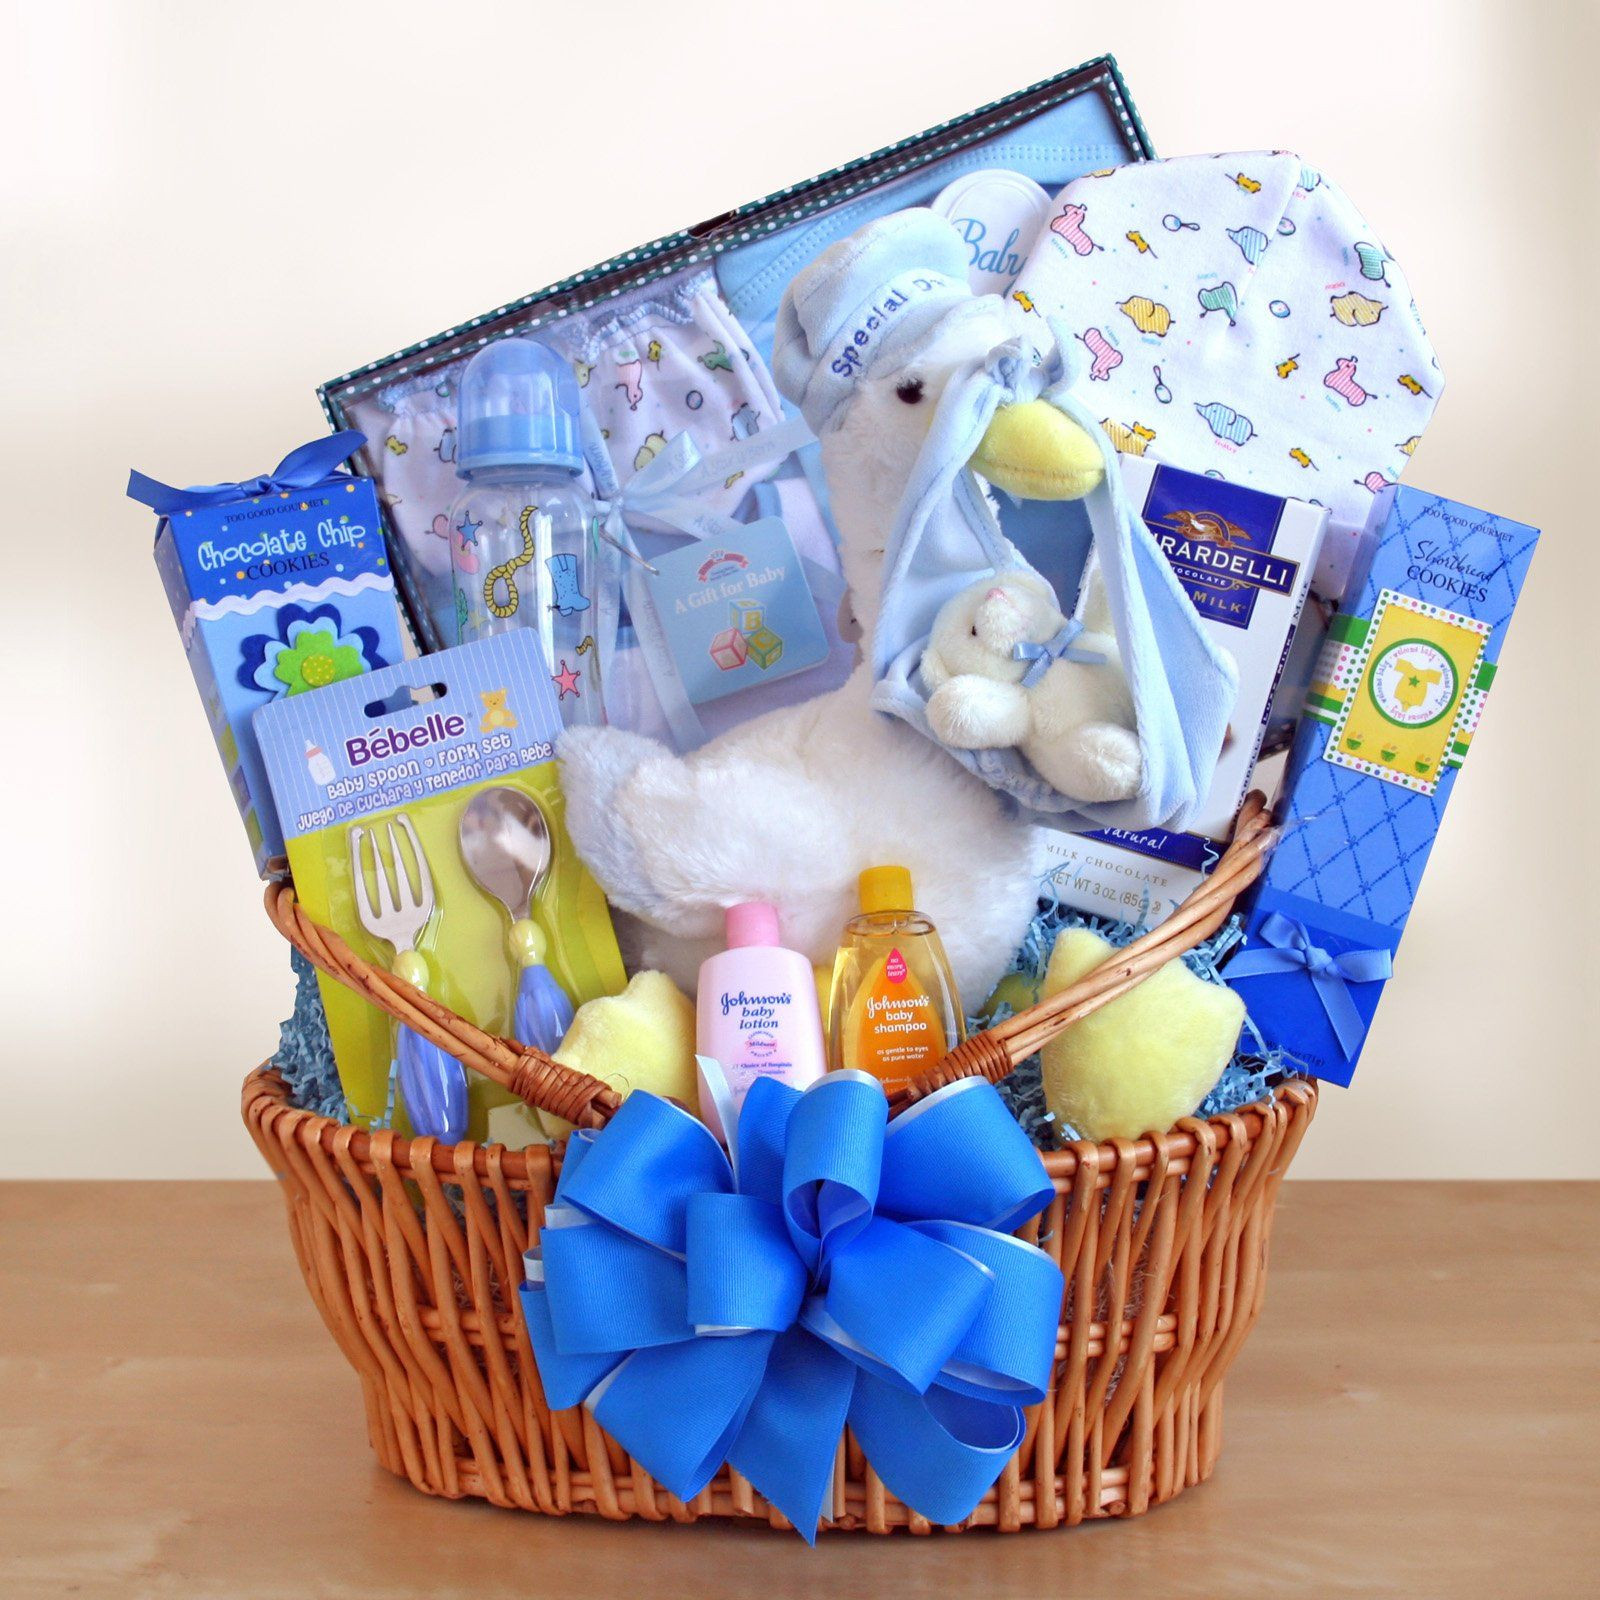 Baby Shower Gift Basket Ideas For Boy
 Special Stork Delivery Baby Boy Gift Basket